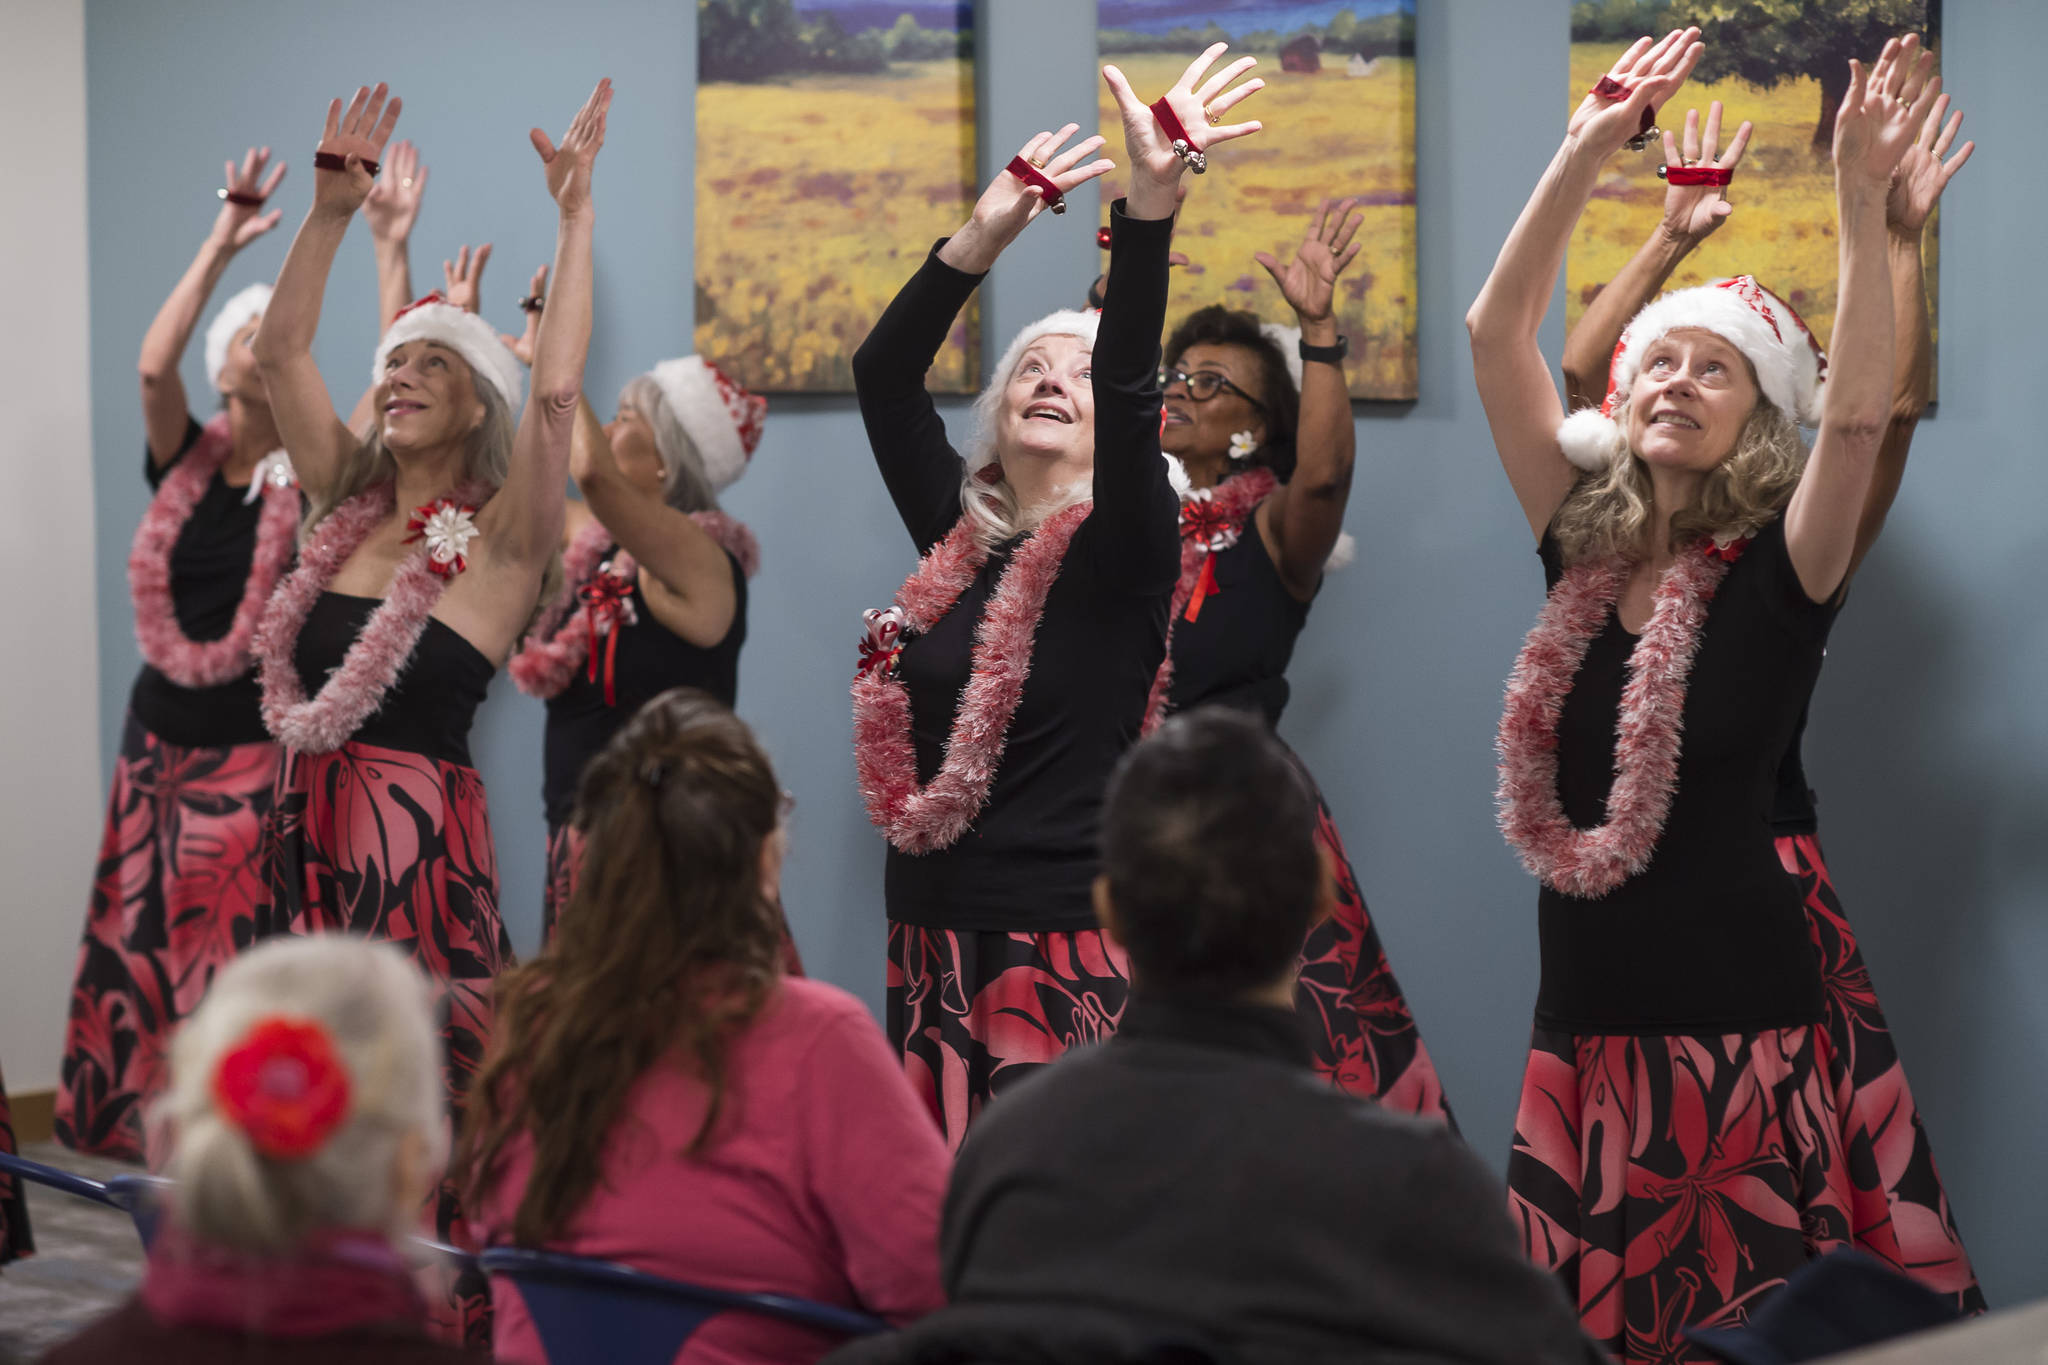 Members of Hui Hula o Manoa perform a Hula Dancing Christmas for residents of the Trillium Landing Senior Apartments on Tuesday, Dec. 4, 2018. The senior hula group will perform again next Tuesday at 12:30 p.m. at the Juneau Senior Center. (Michael Penn | Juneau Empire)